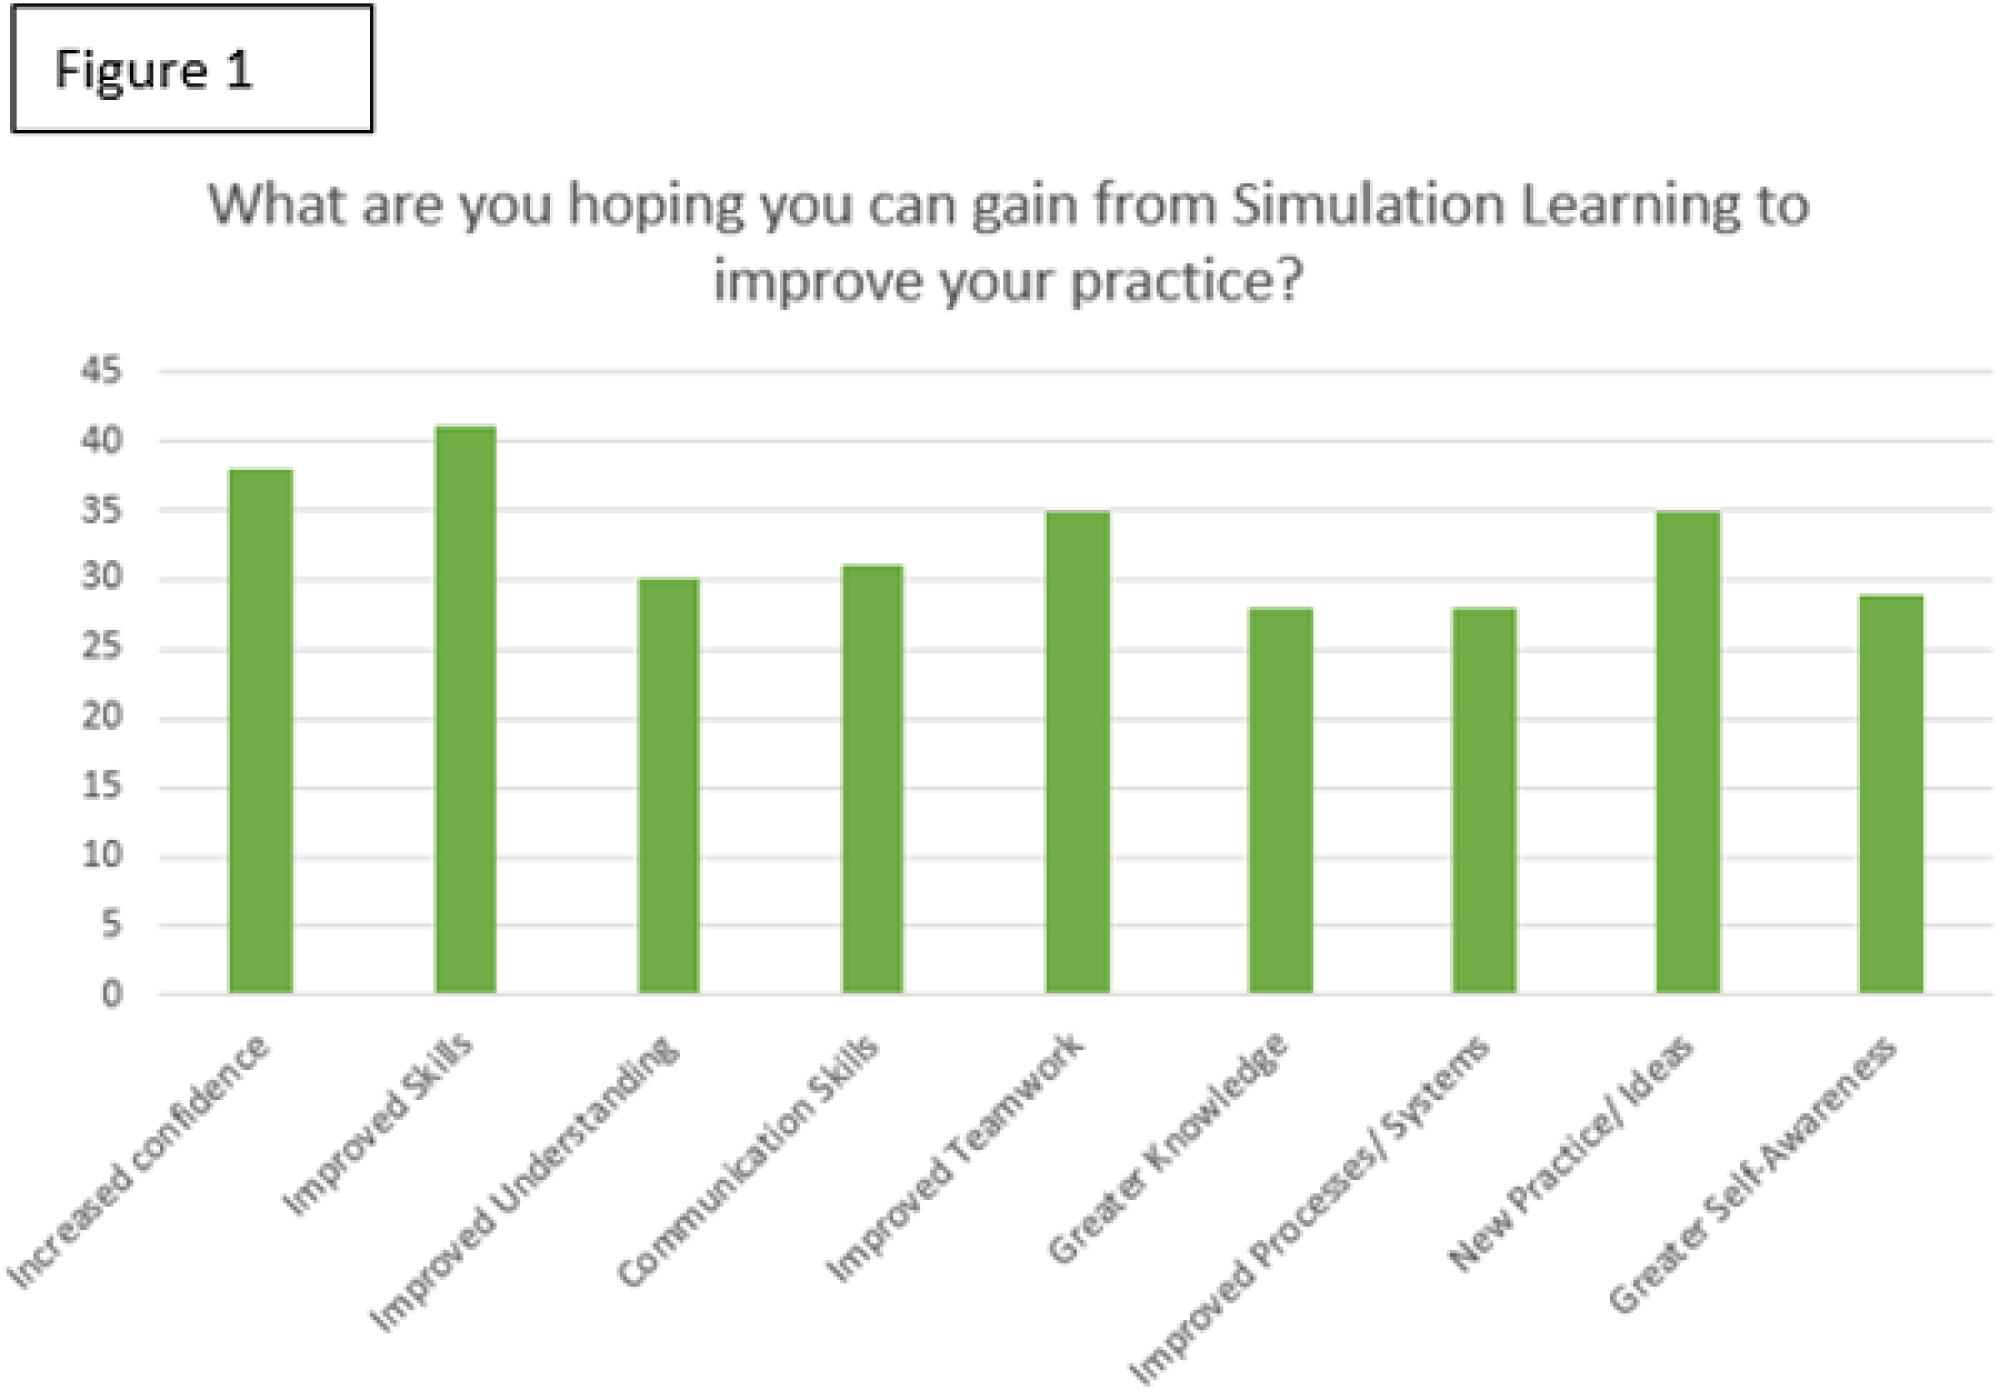 Participants’ response to the question: What participants expect simulation-based learning to improve in their practice?